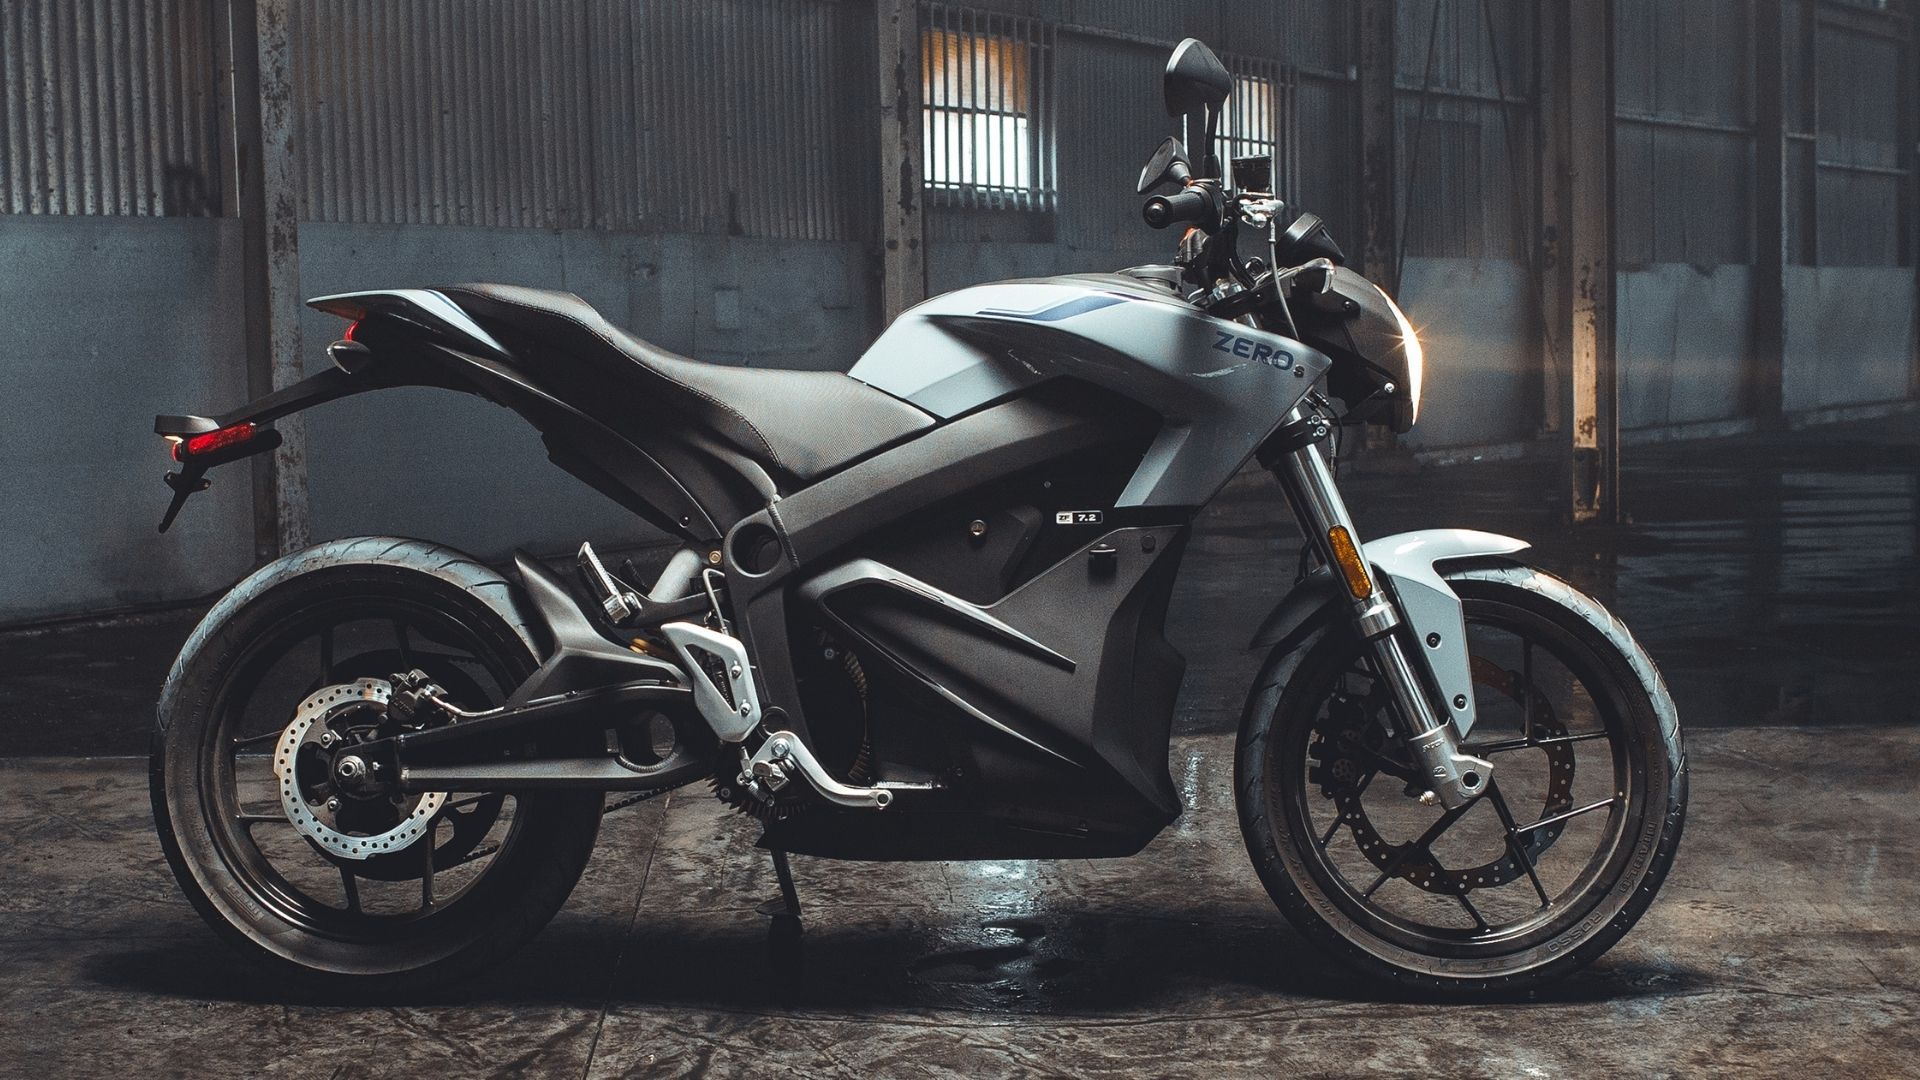 A side view of an electric motorcycle from Zero Motorcycles